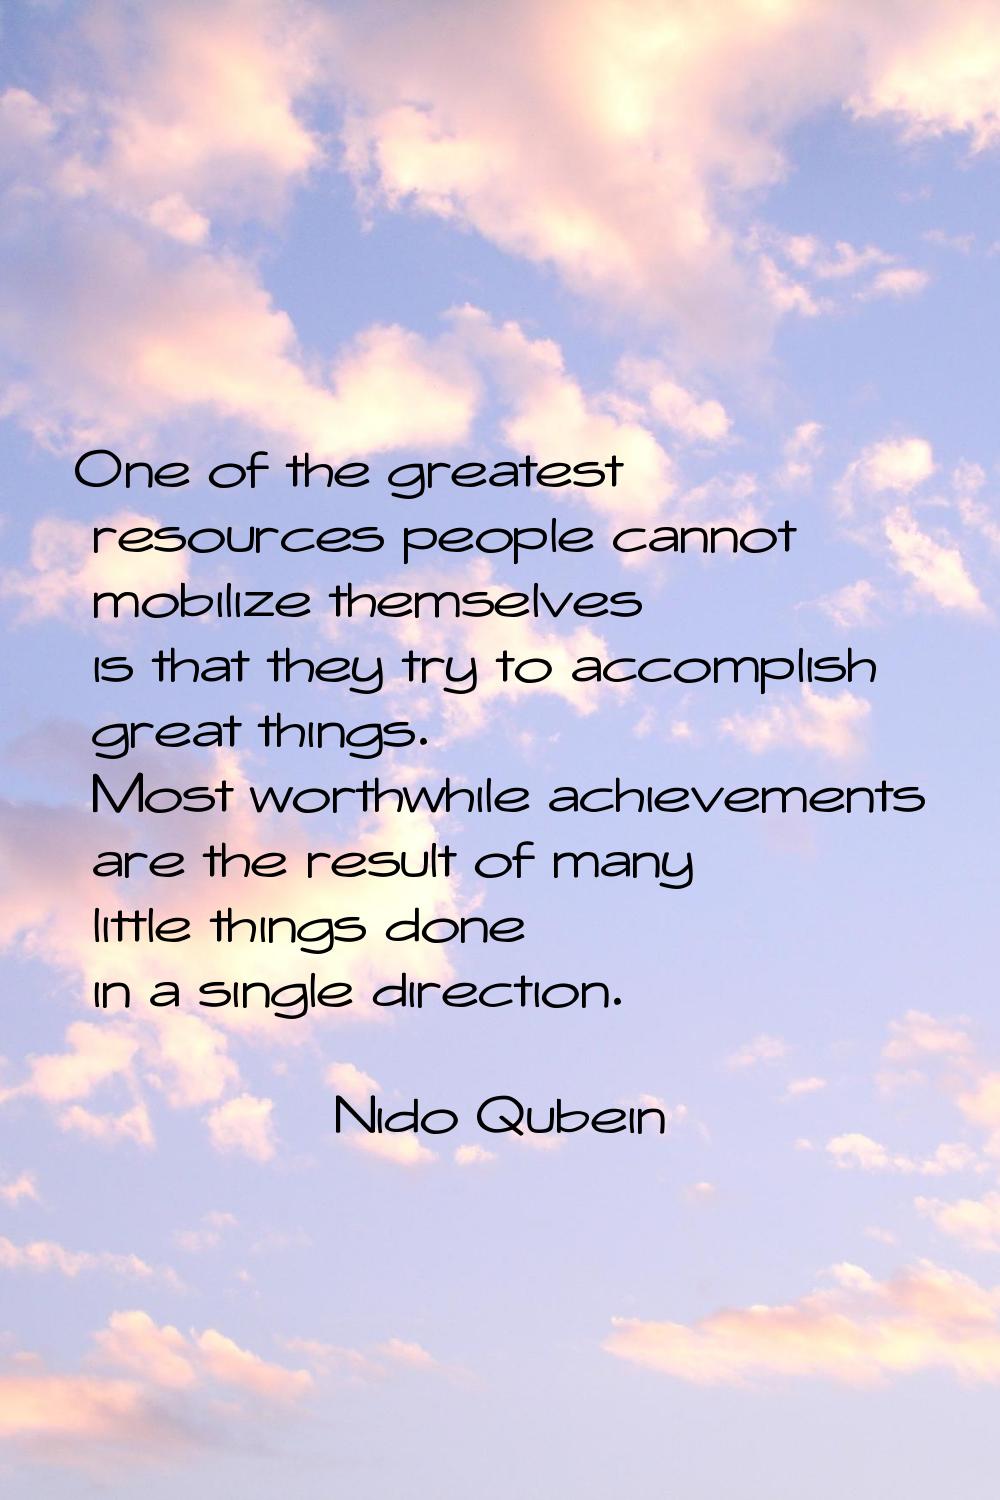 One of the greatest resources people cannot mobilize themselves is that they try to accomplish grea